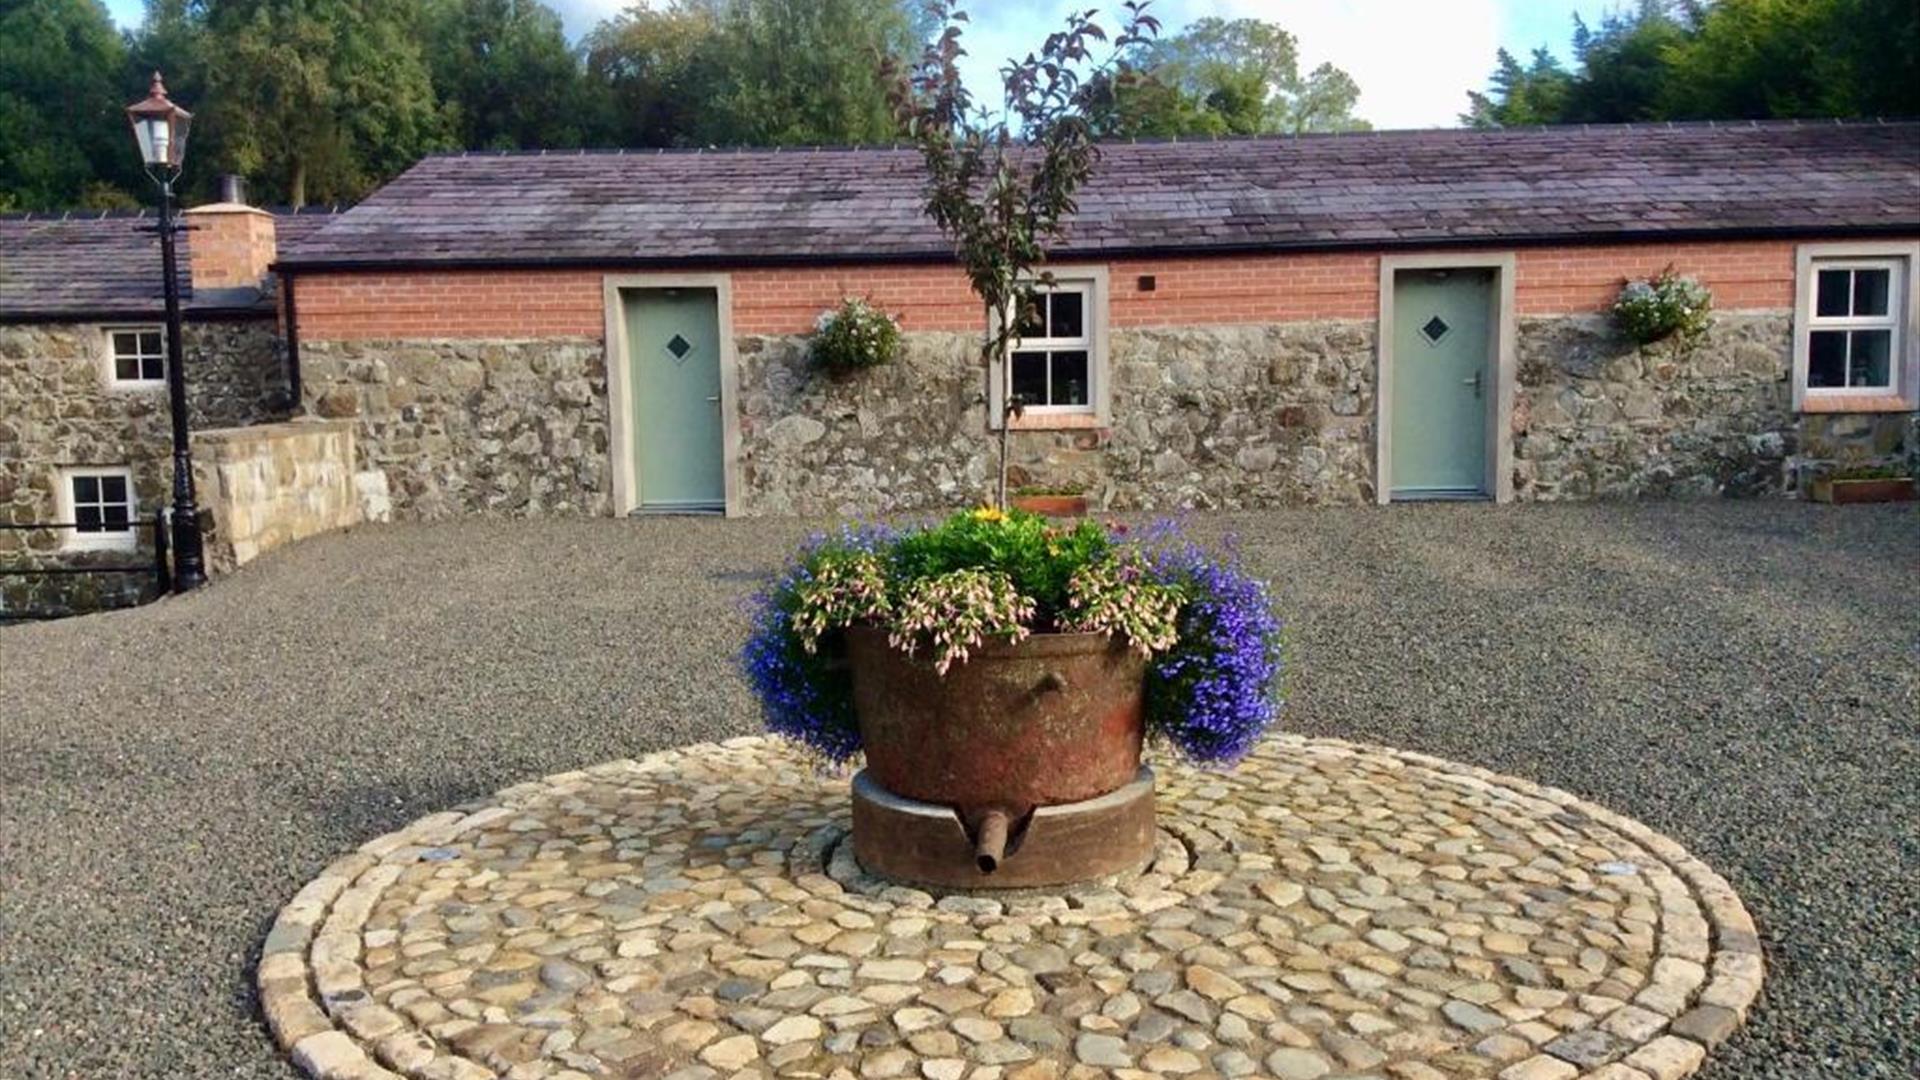 Image shows front of cottages with flower bed in a stone circle